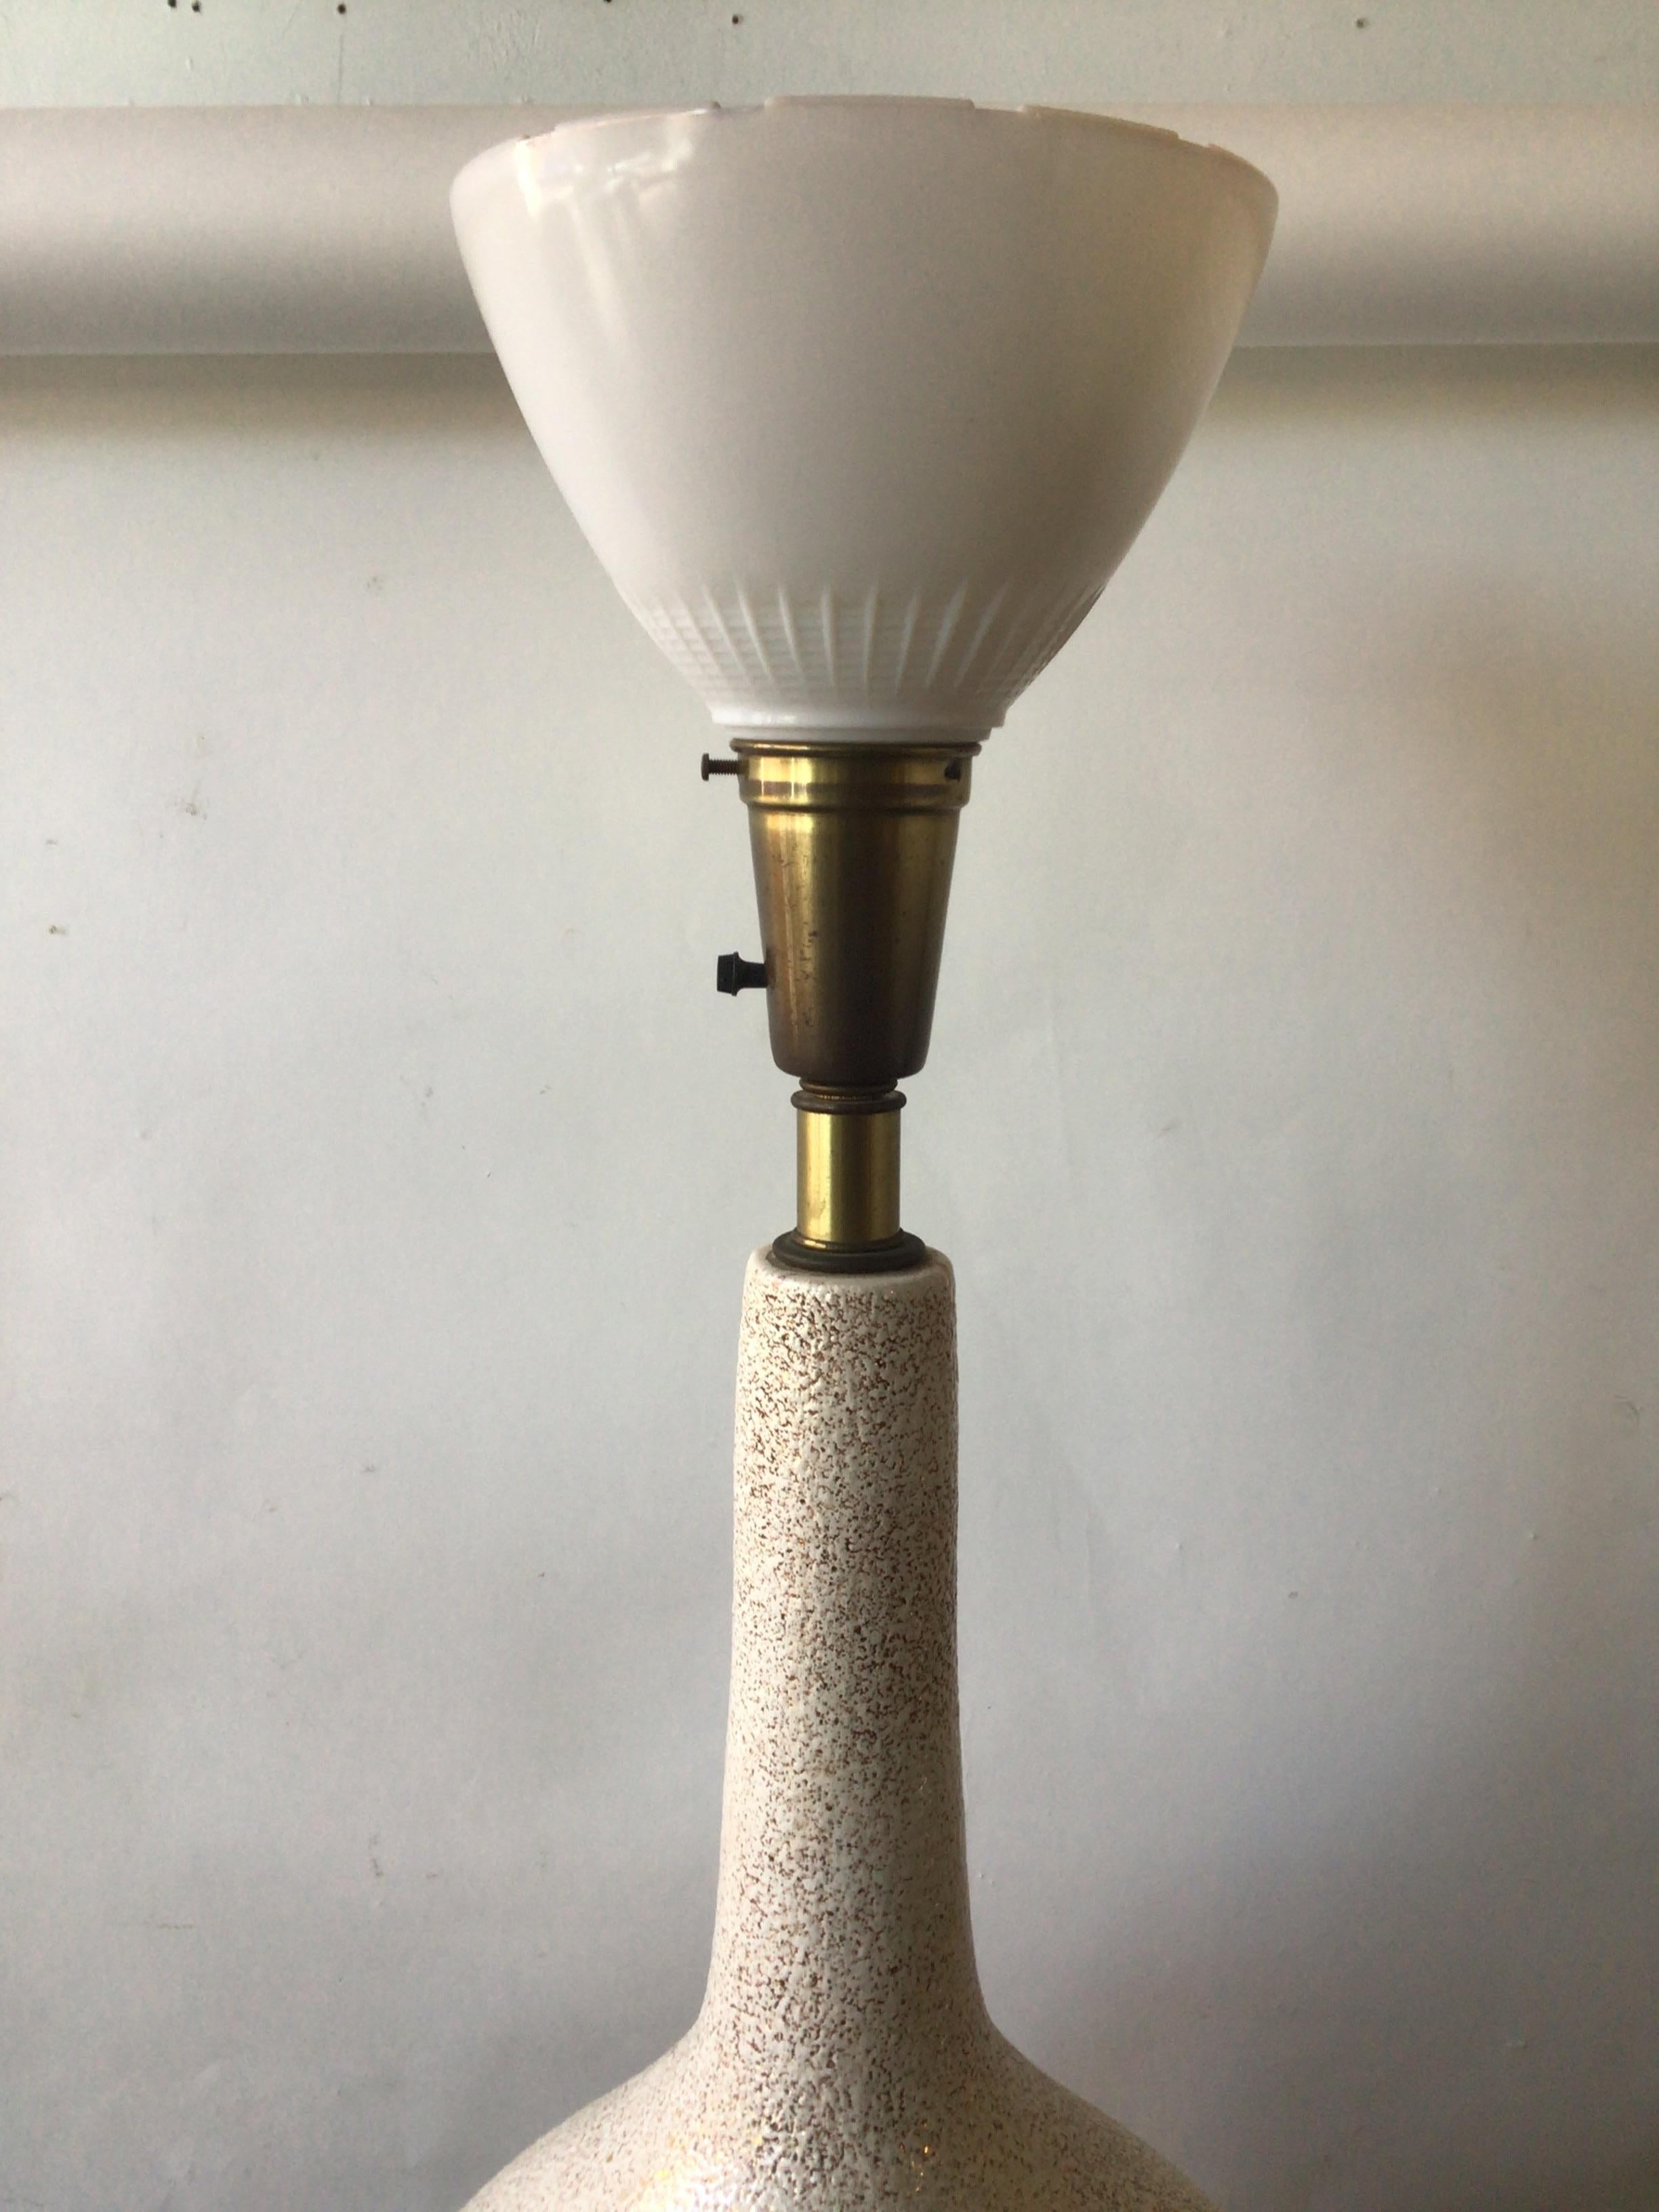 Large 1960s “Groovy” White Orange and Gold Ceramic Lamp on Wood Base For Sale 2